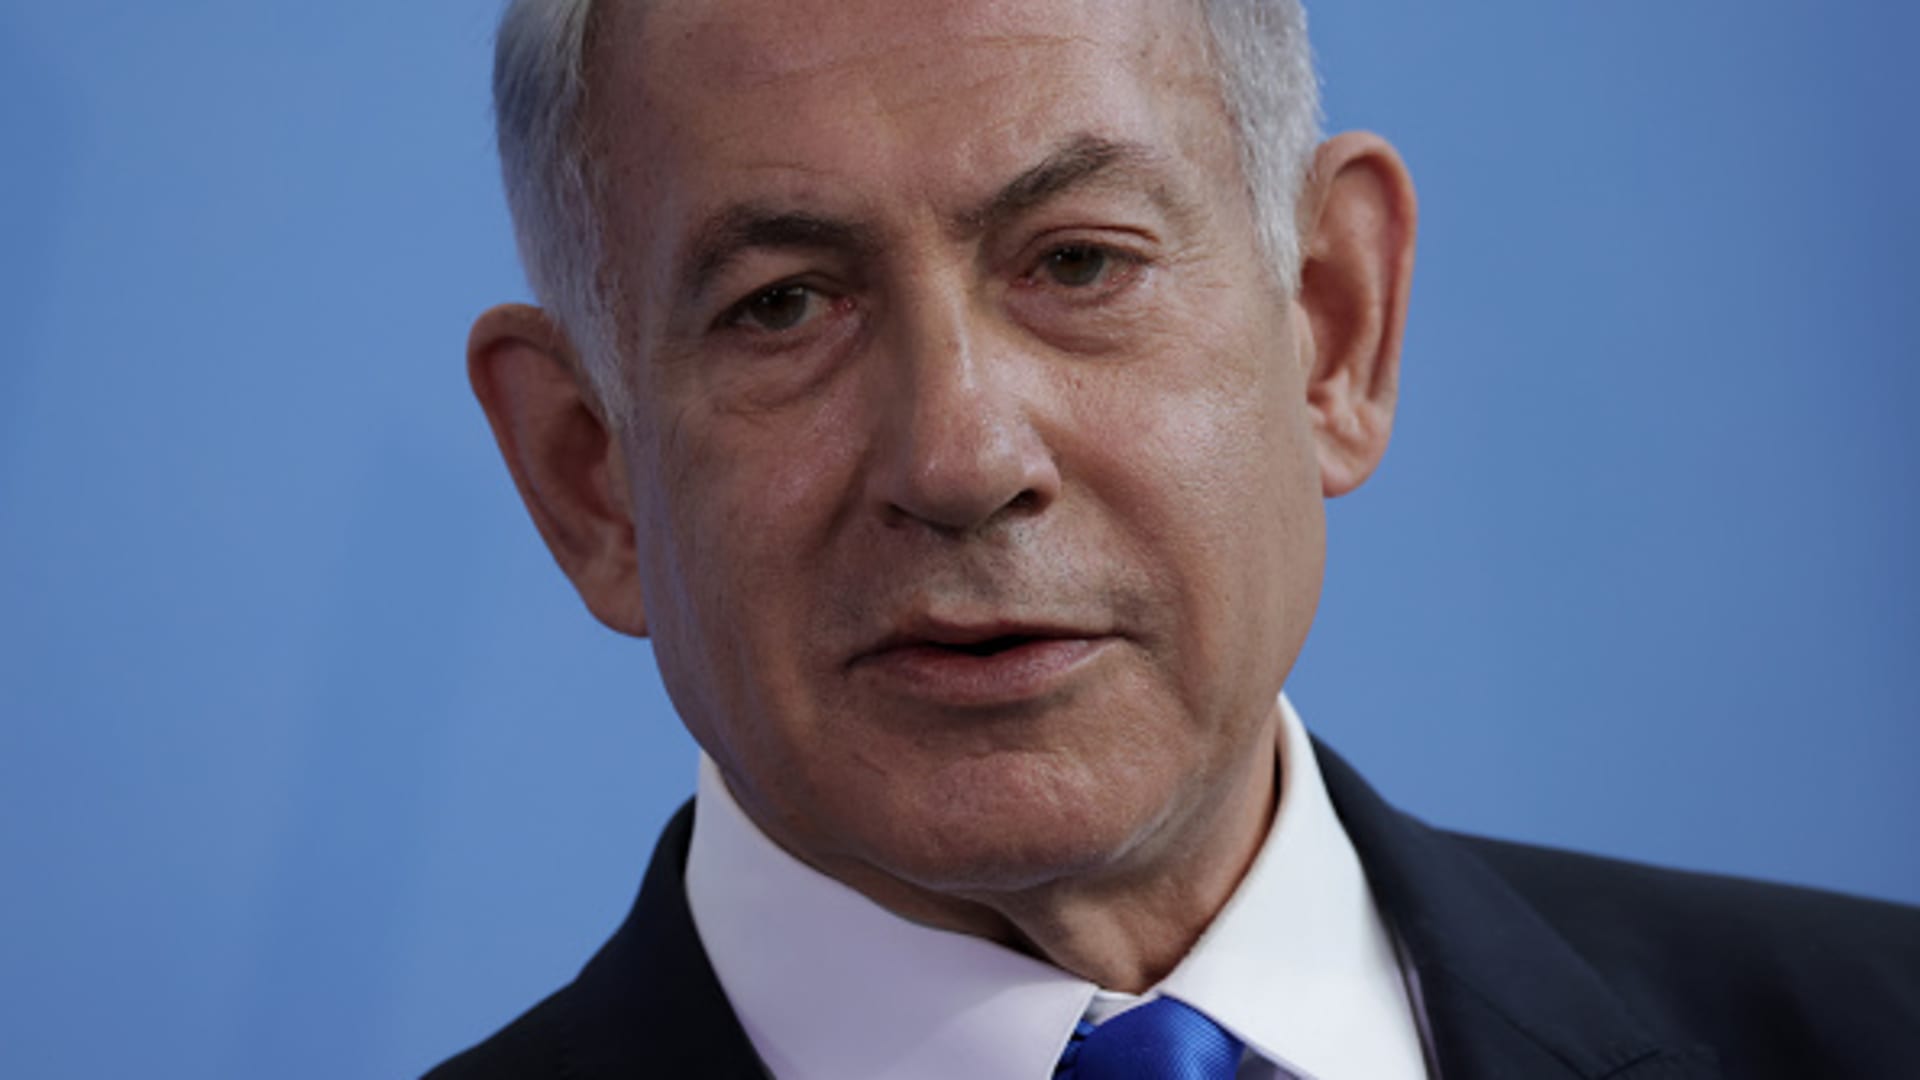 Netanyahu says he's doing 'excellently,' plans to attend controversial judicial reform vote on Monday